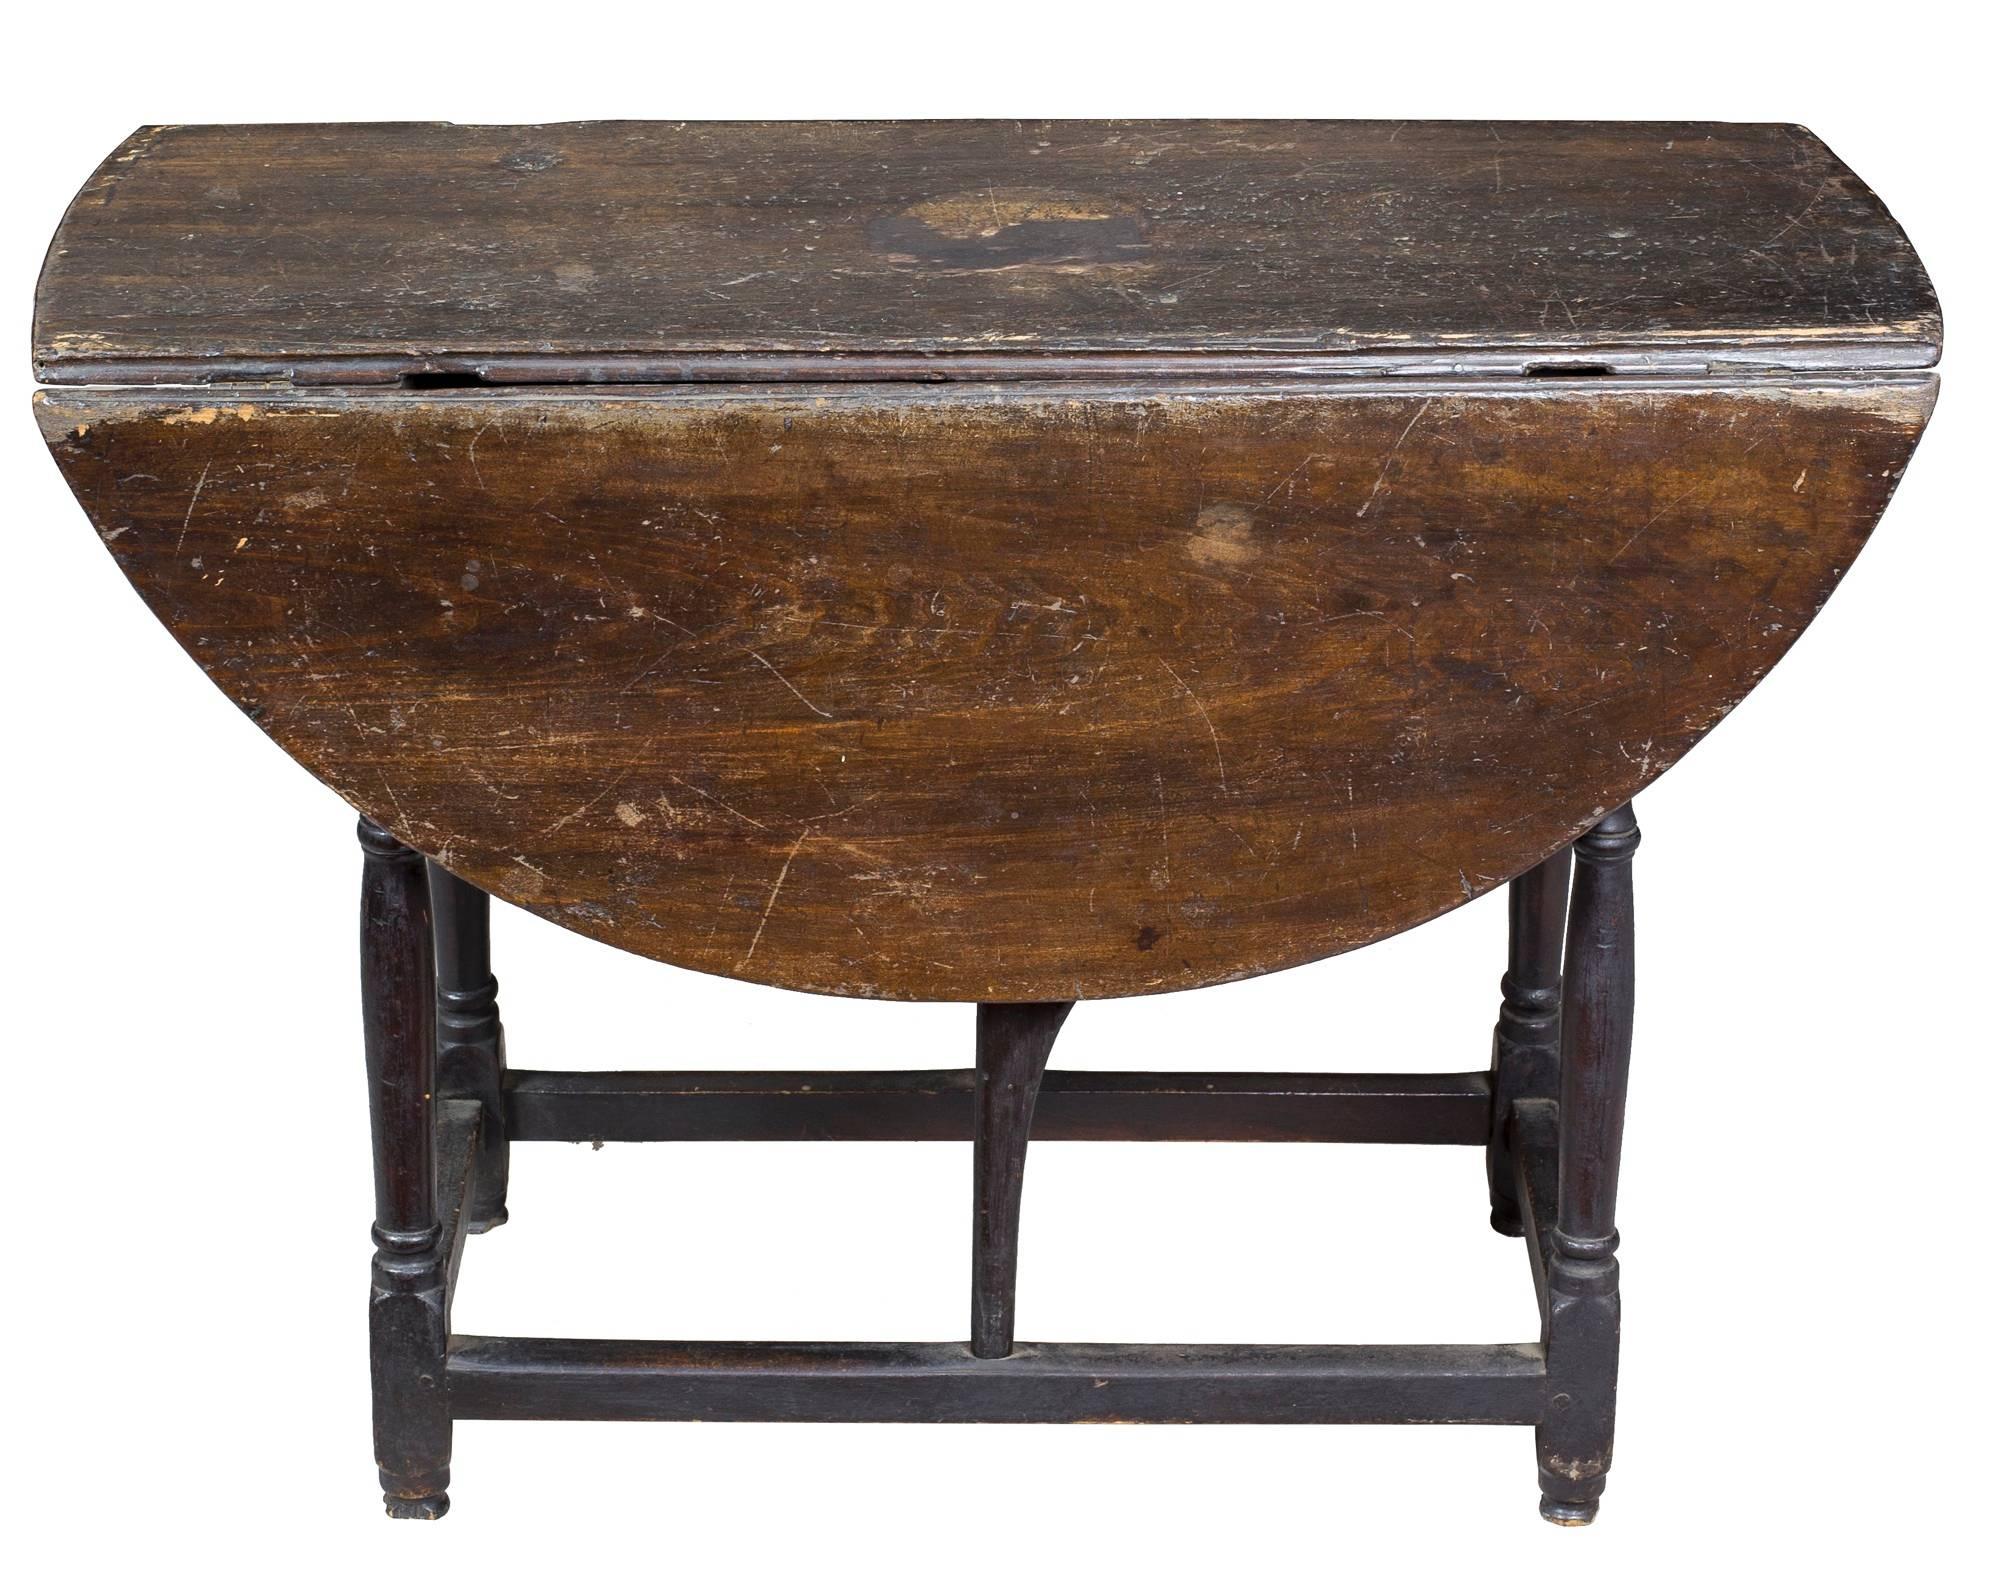 Rare Tulip Poplar Butterfly Table in Original Surface, New York, circa 1730 In Excellent Condition For Sale In Providence, RI